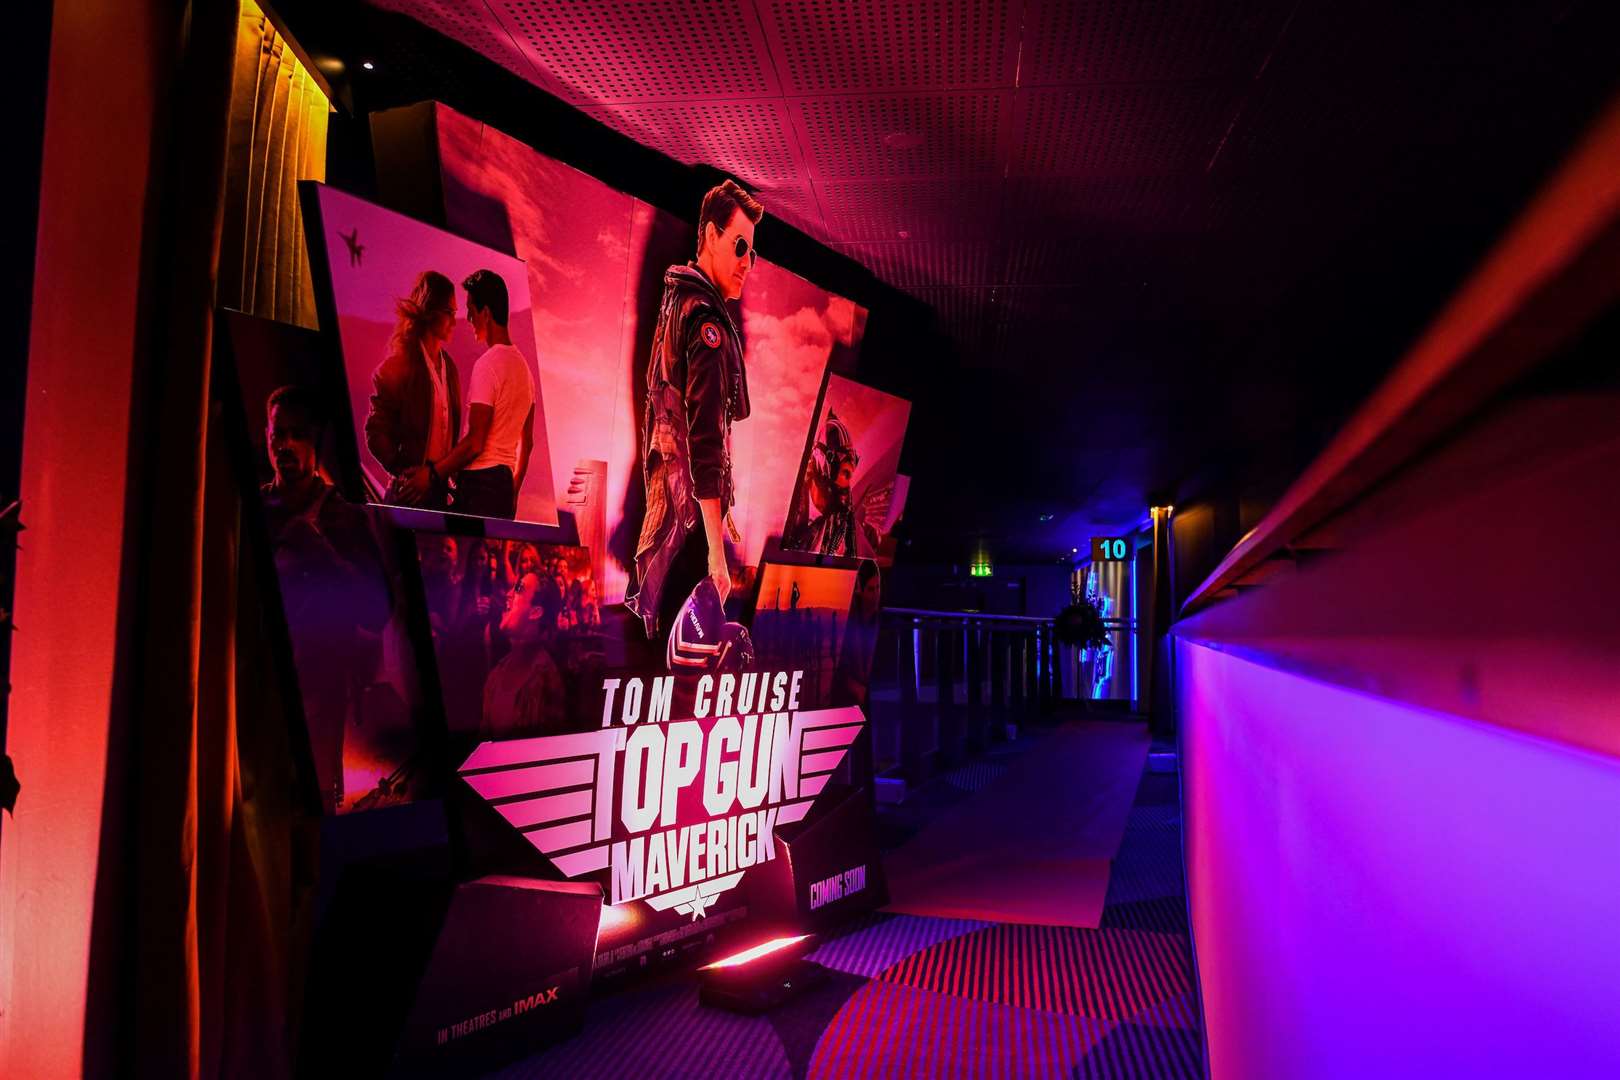 Top Gun Maverick was a big hit earlier this year - but the number of big releases is hitting the bottom line of many cinema chains. Picture: Showcase Cinema Bluewater